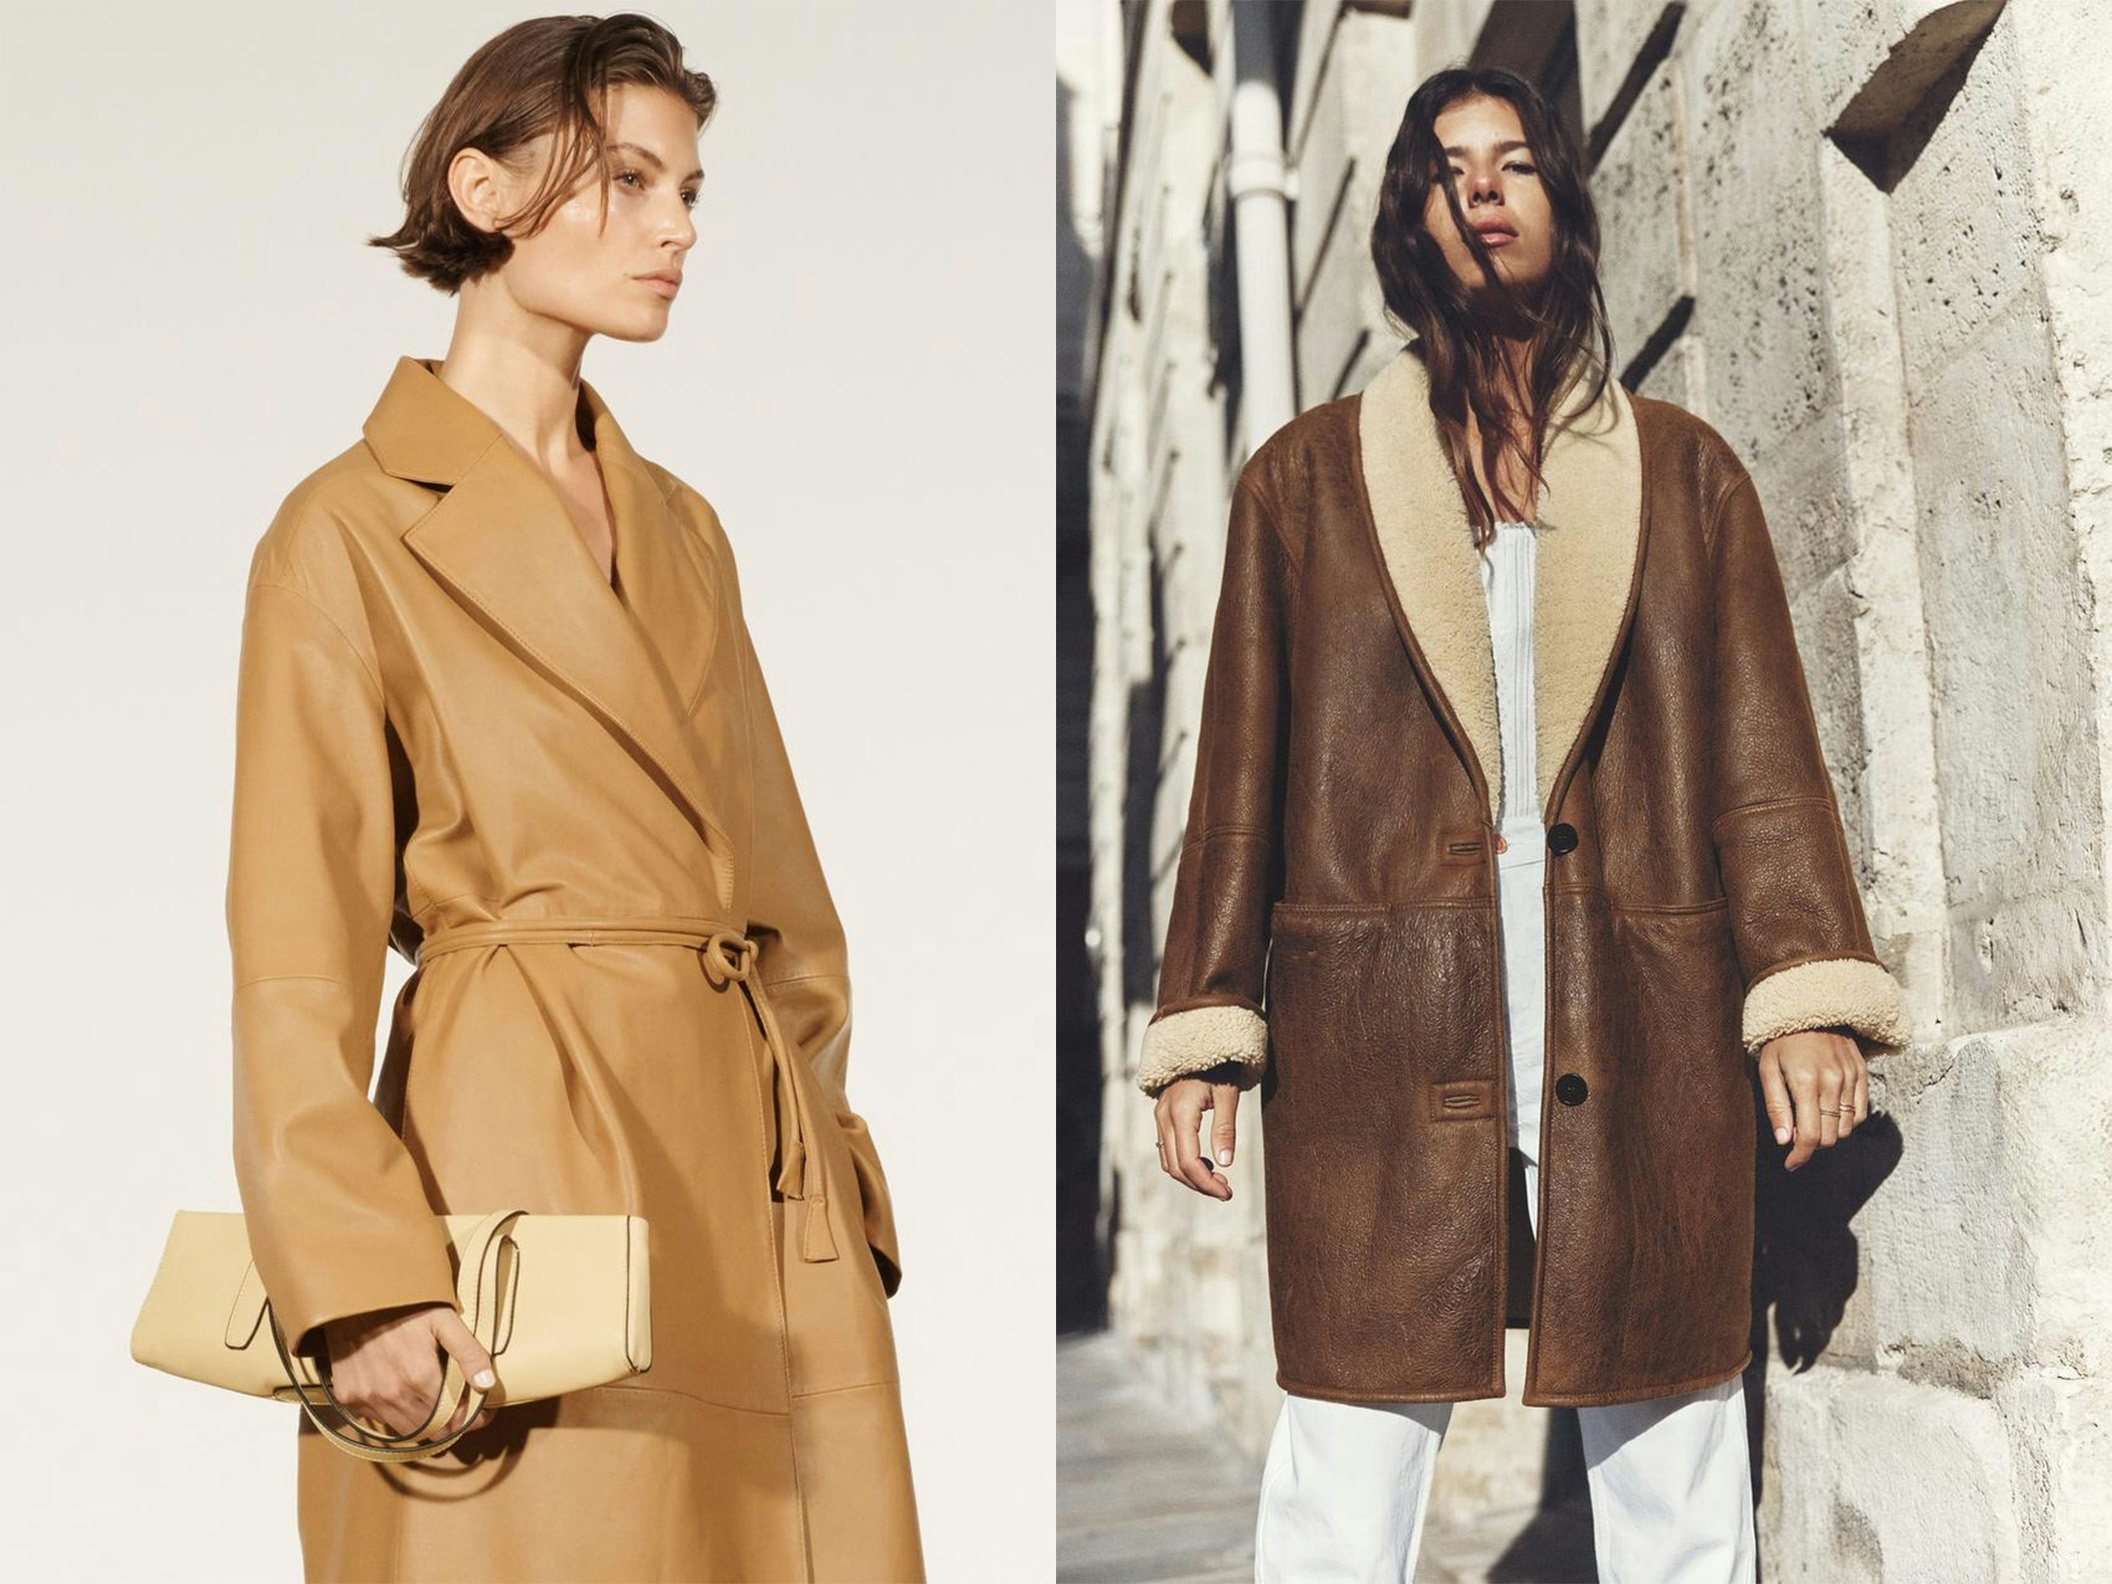 Zara’s limited edition real leather collection includes a $869 double-faced leather jacket with fleece (right). Photo: Zara